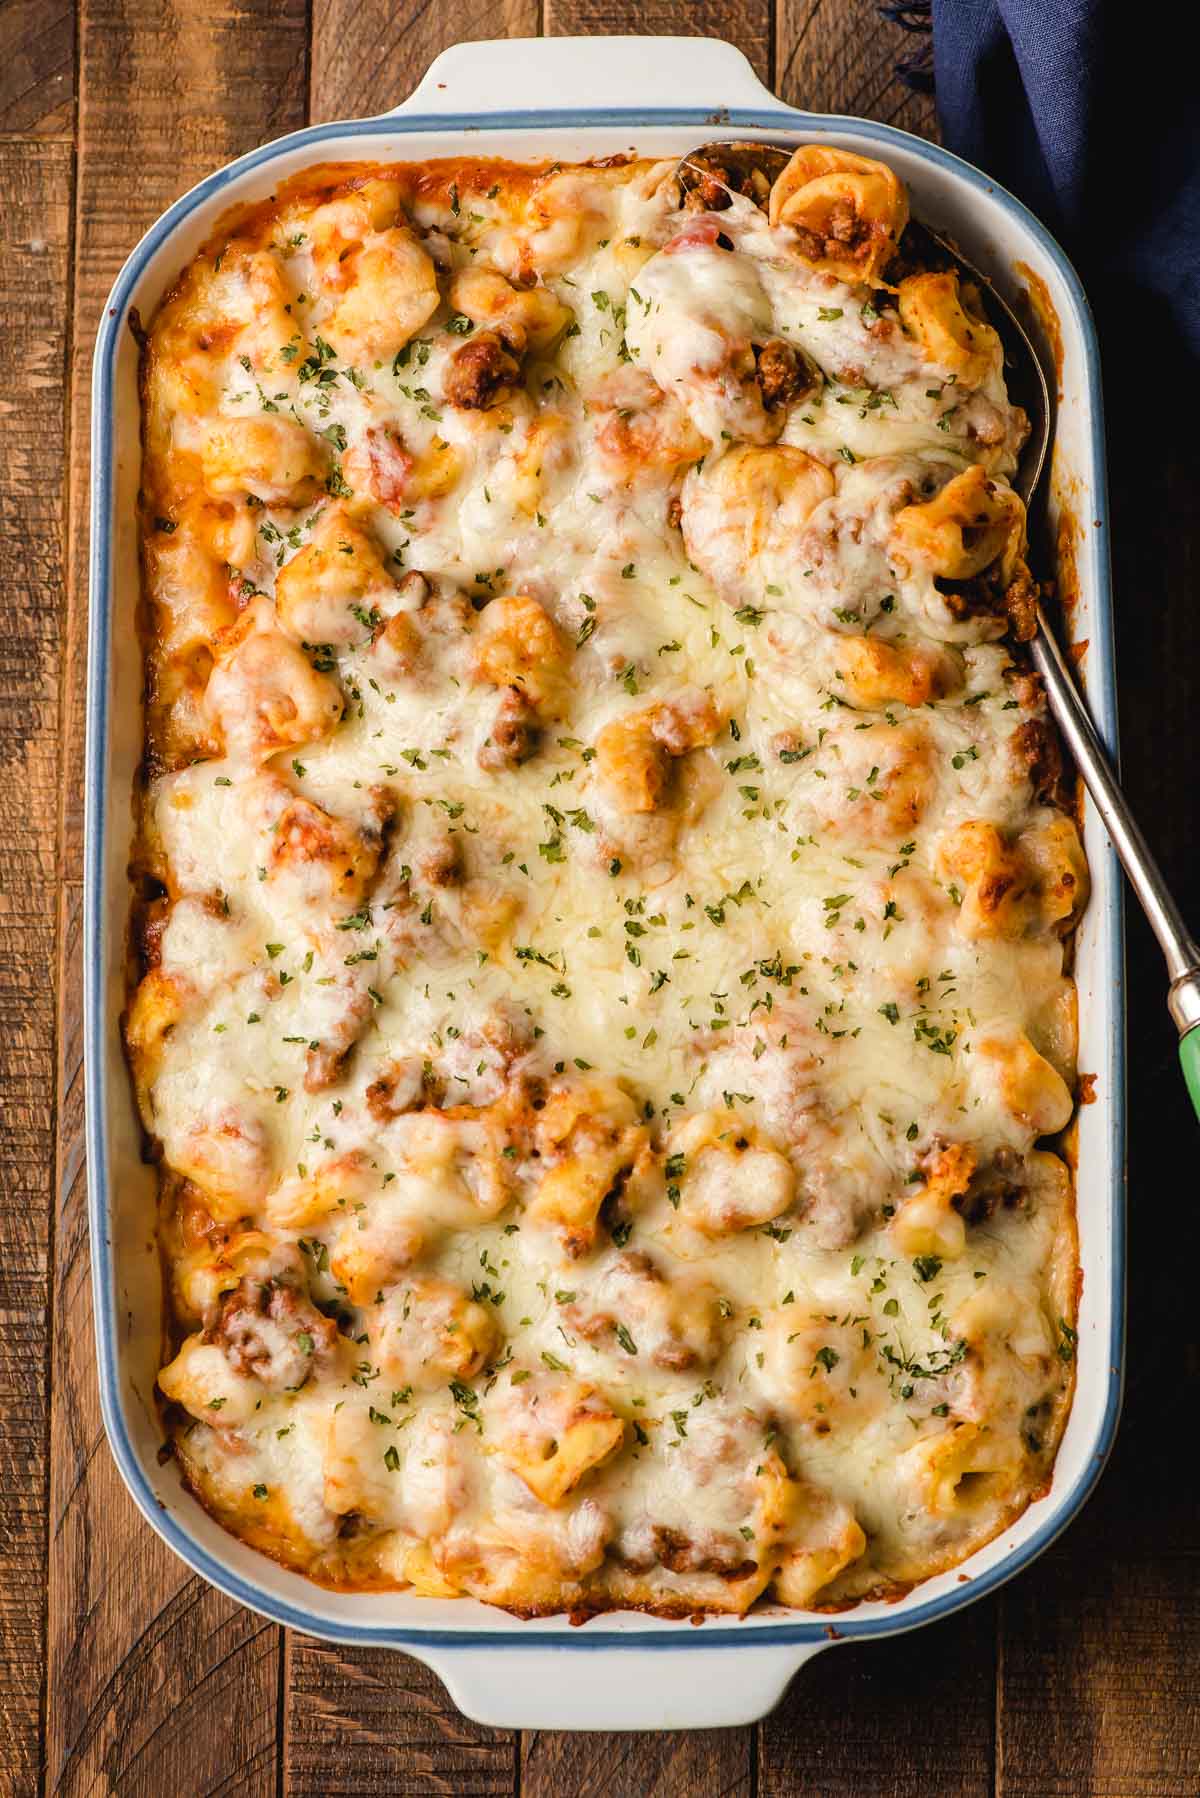 Baked tortellini casserole covered with mozzarella cheese.